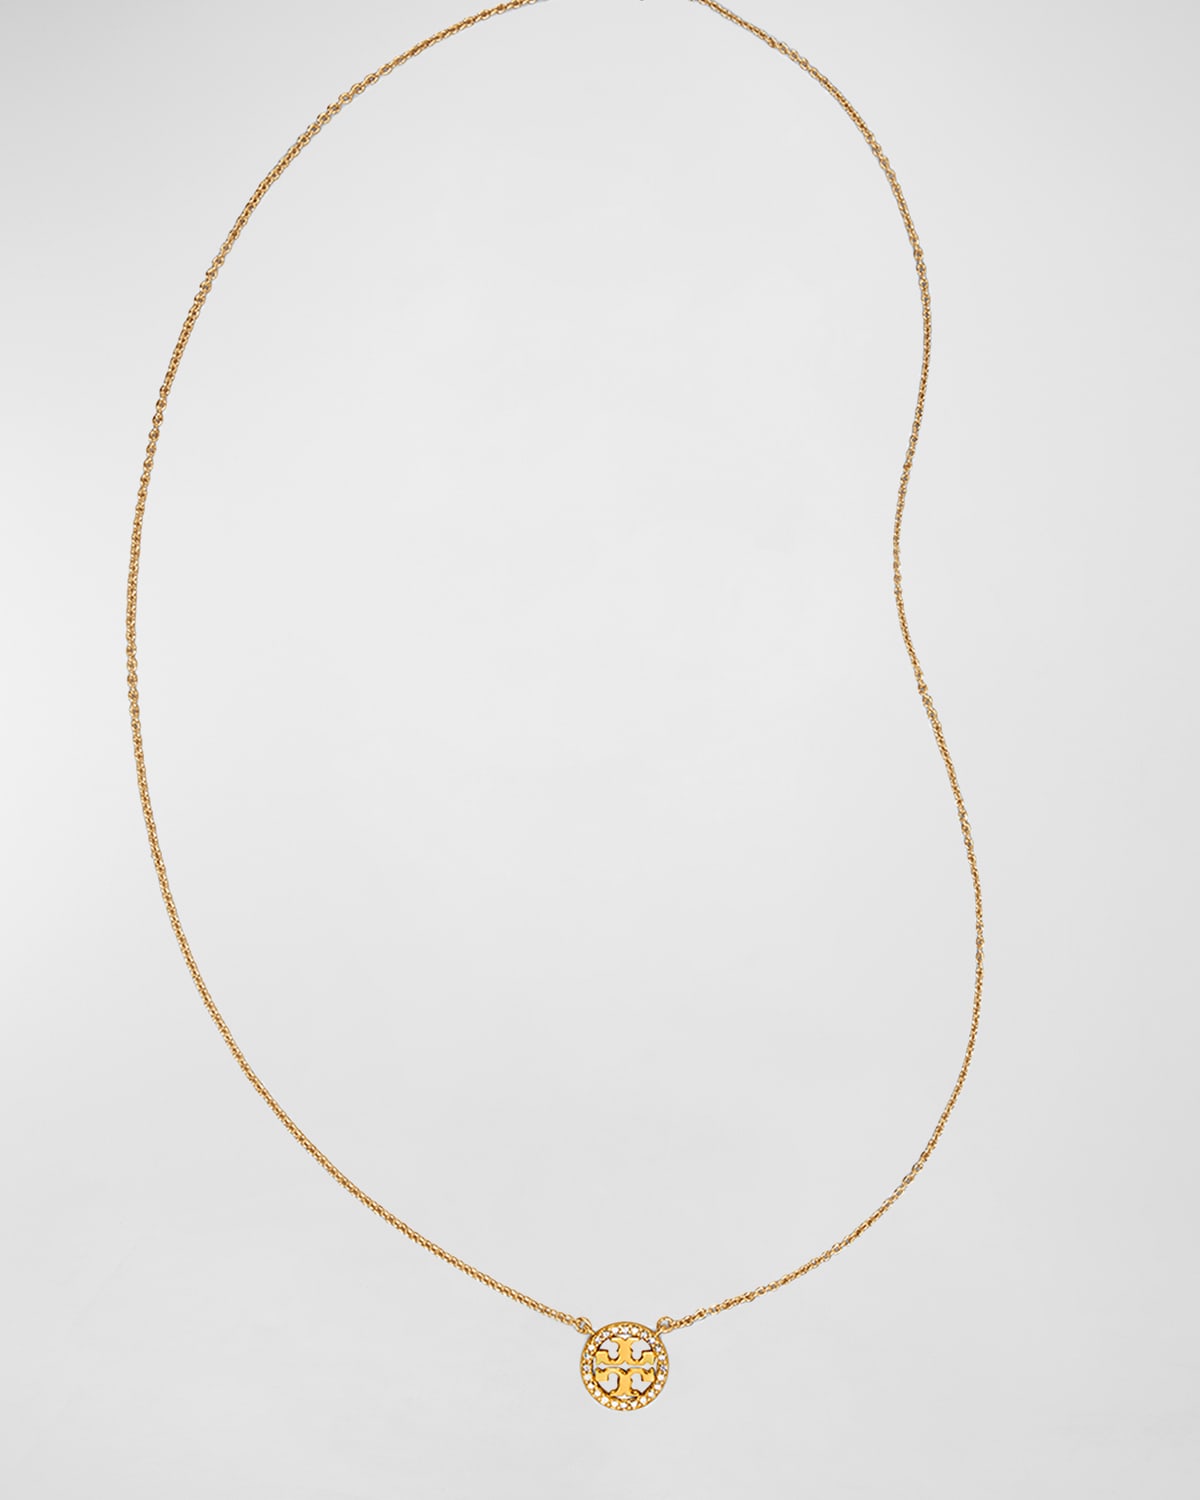 TORY BURCH MILLER PAVE LOGO DELICATE NECKLACE